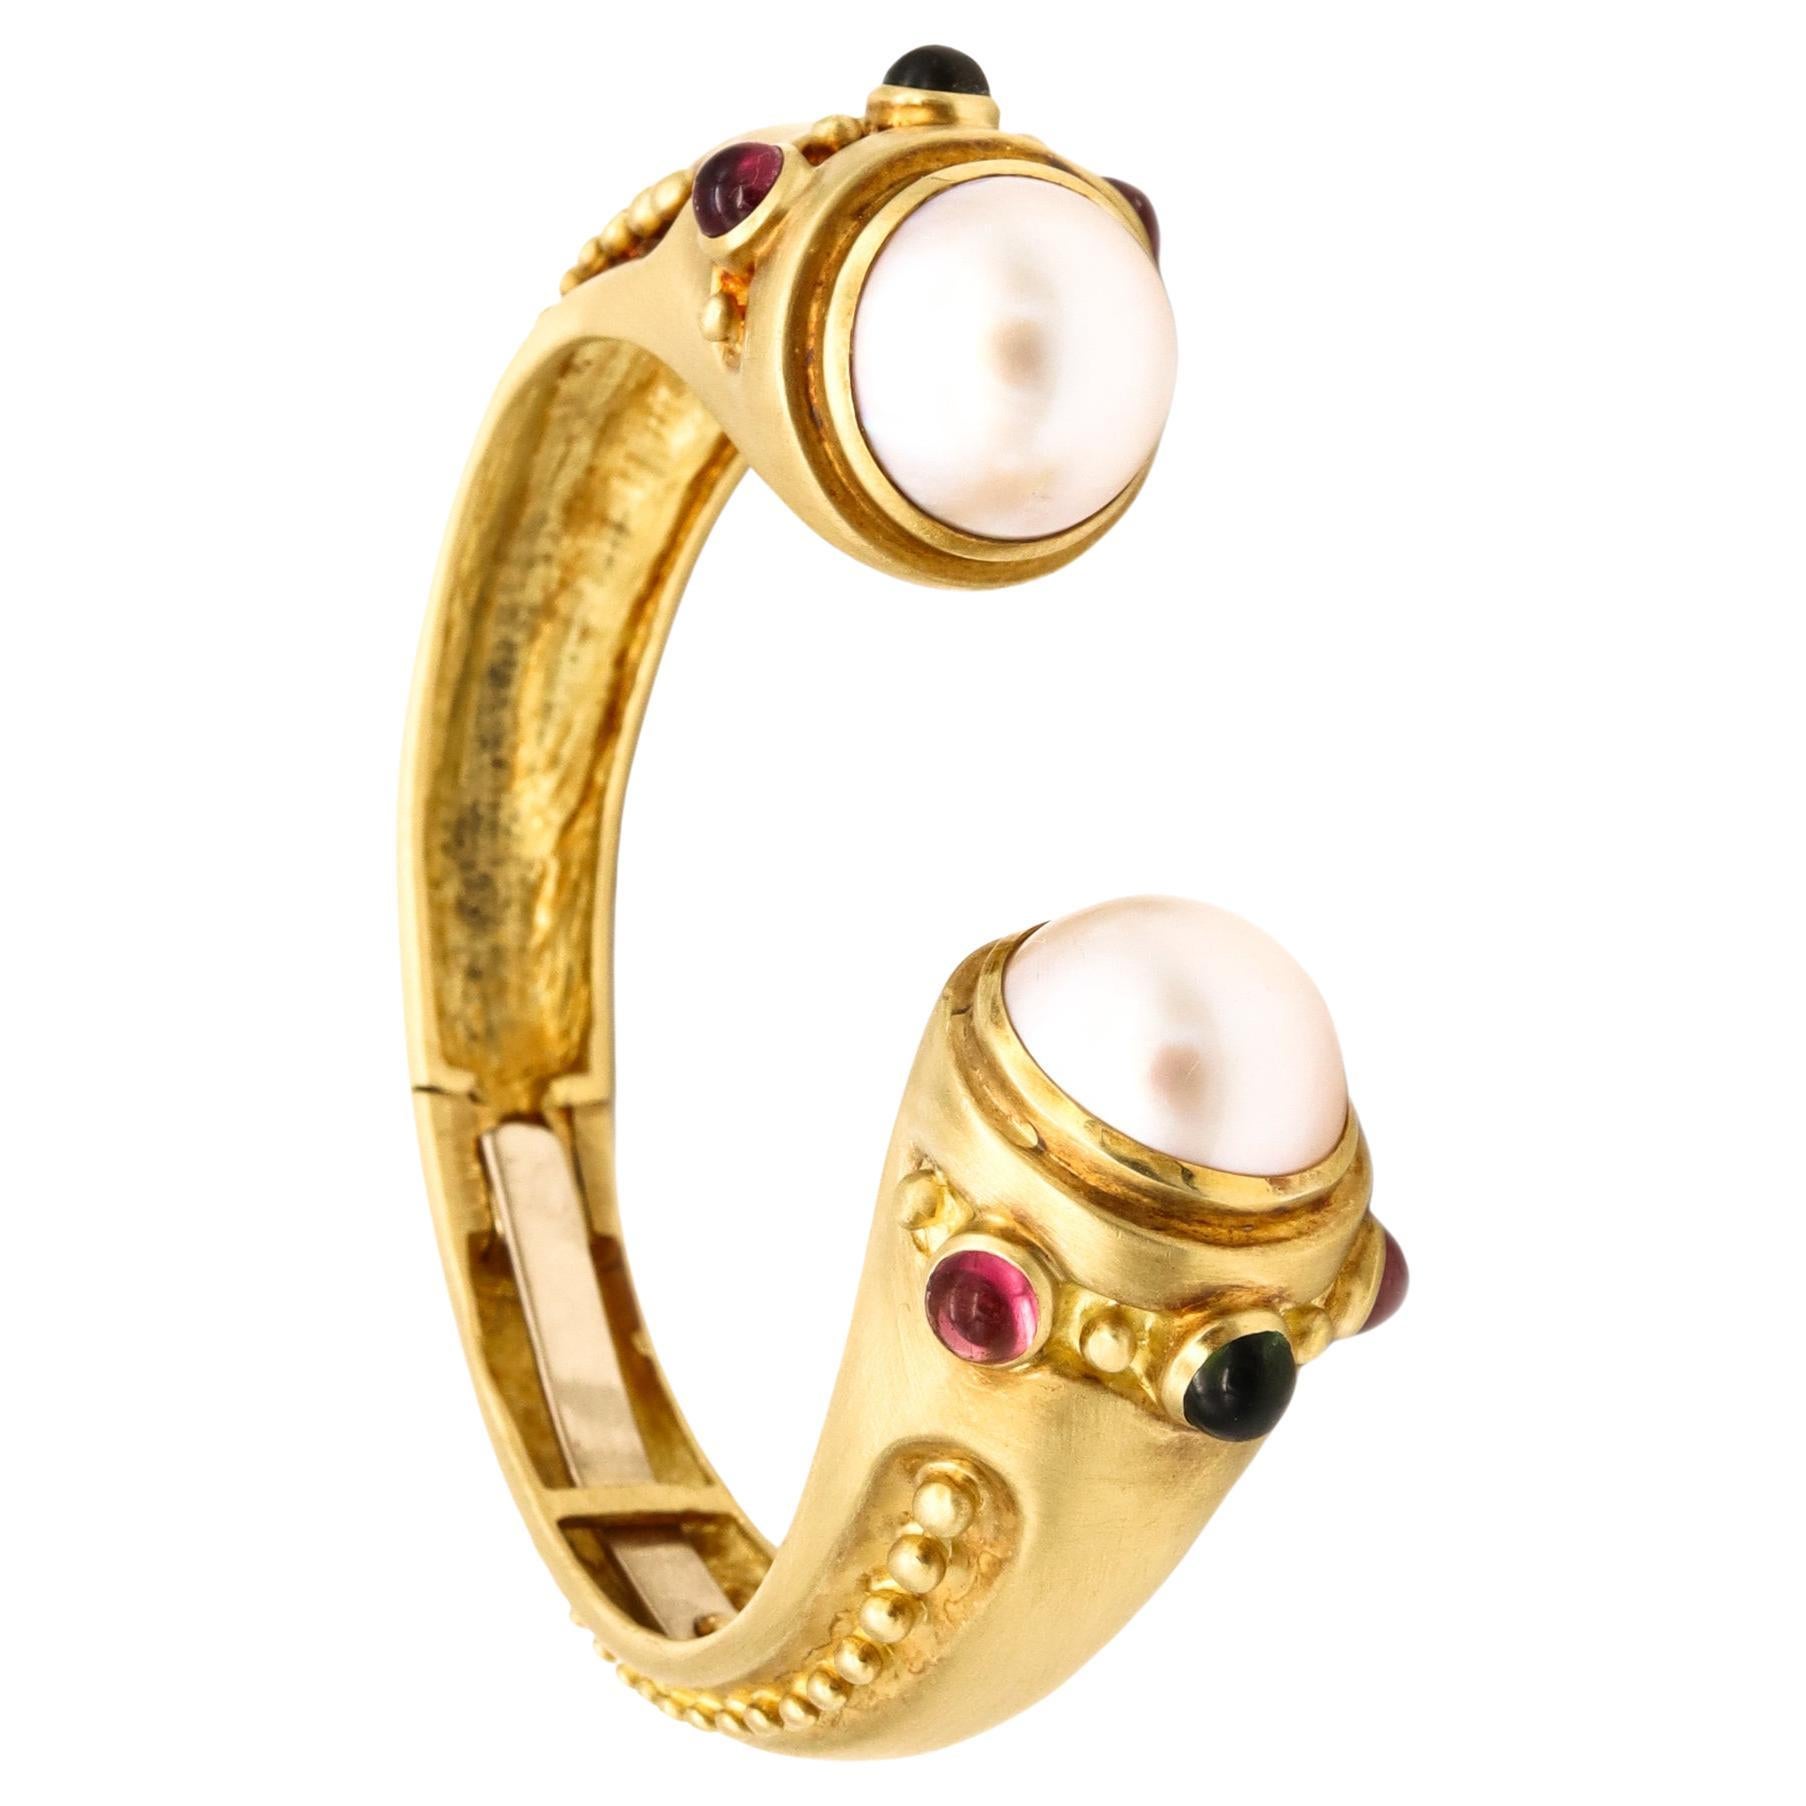 Marlene Stowe Cuff Bracelet in 18Kt Brushed Gold with Mabe Pearls and Tourmaline For Sale